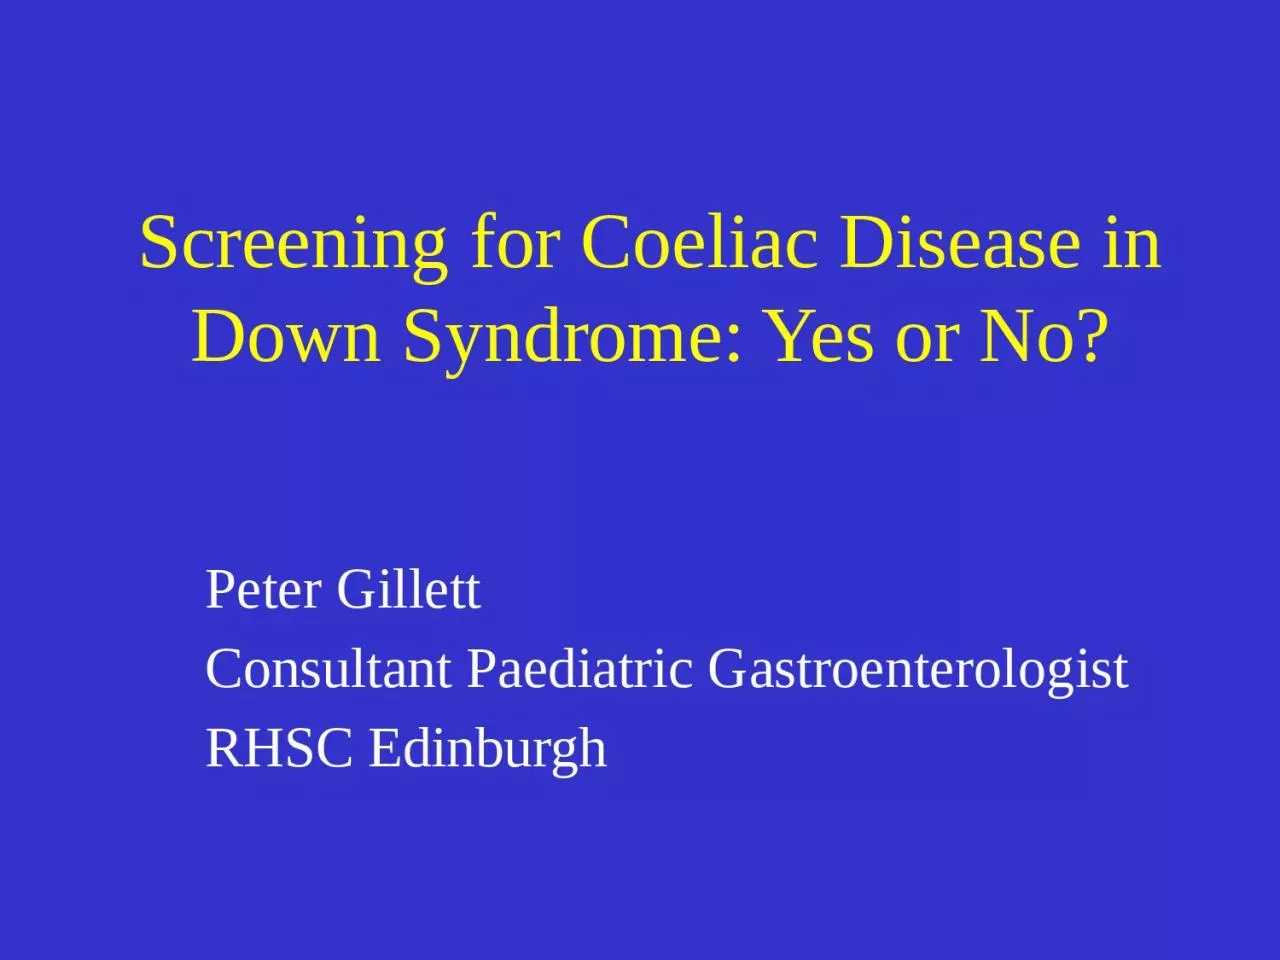 Screening for Coeliac Disease in Down Syndrome: Yes or No?